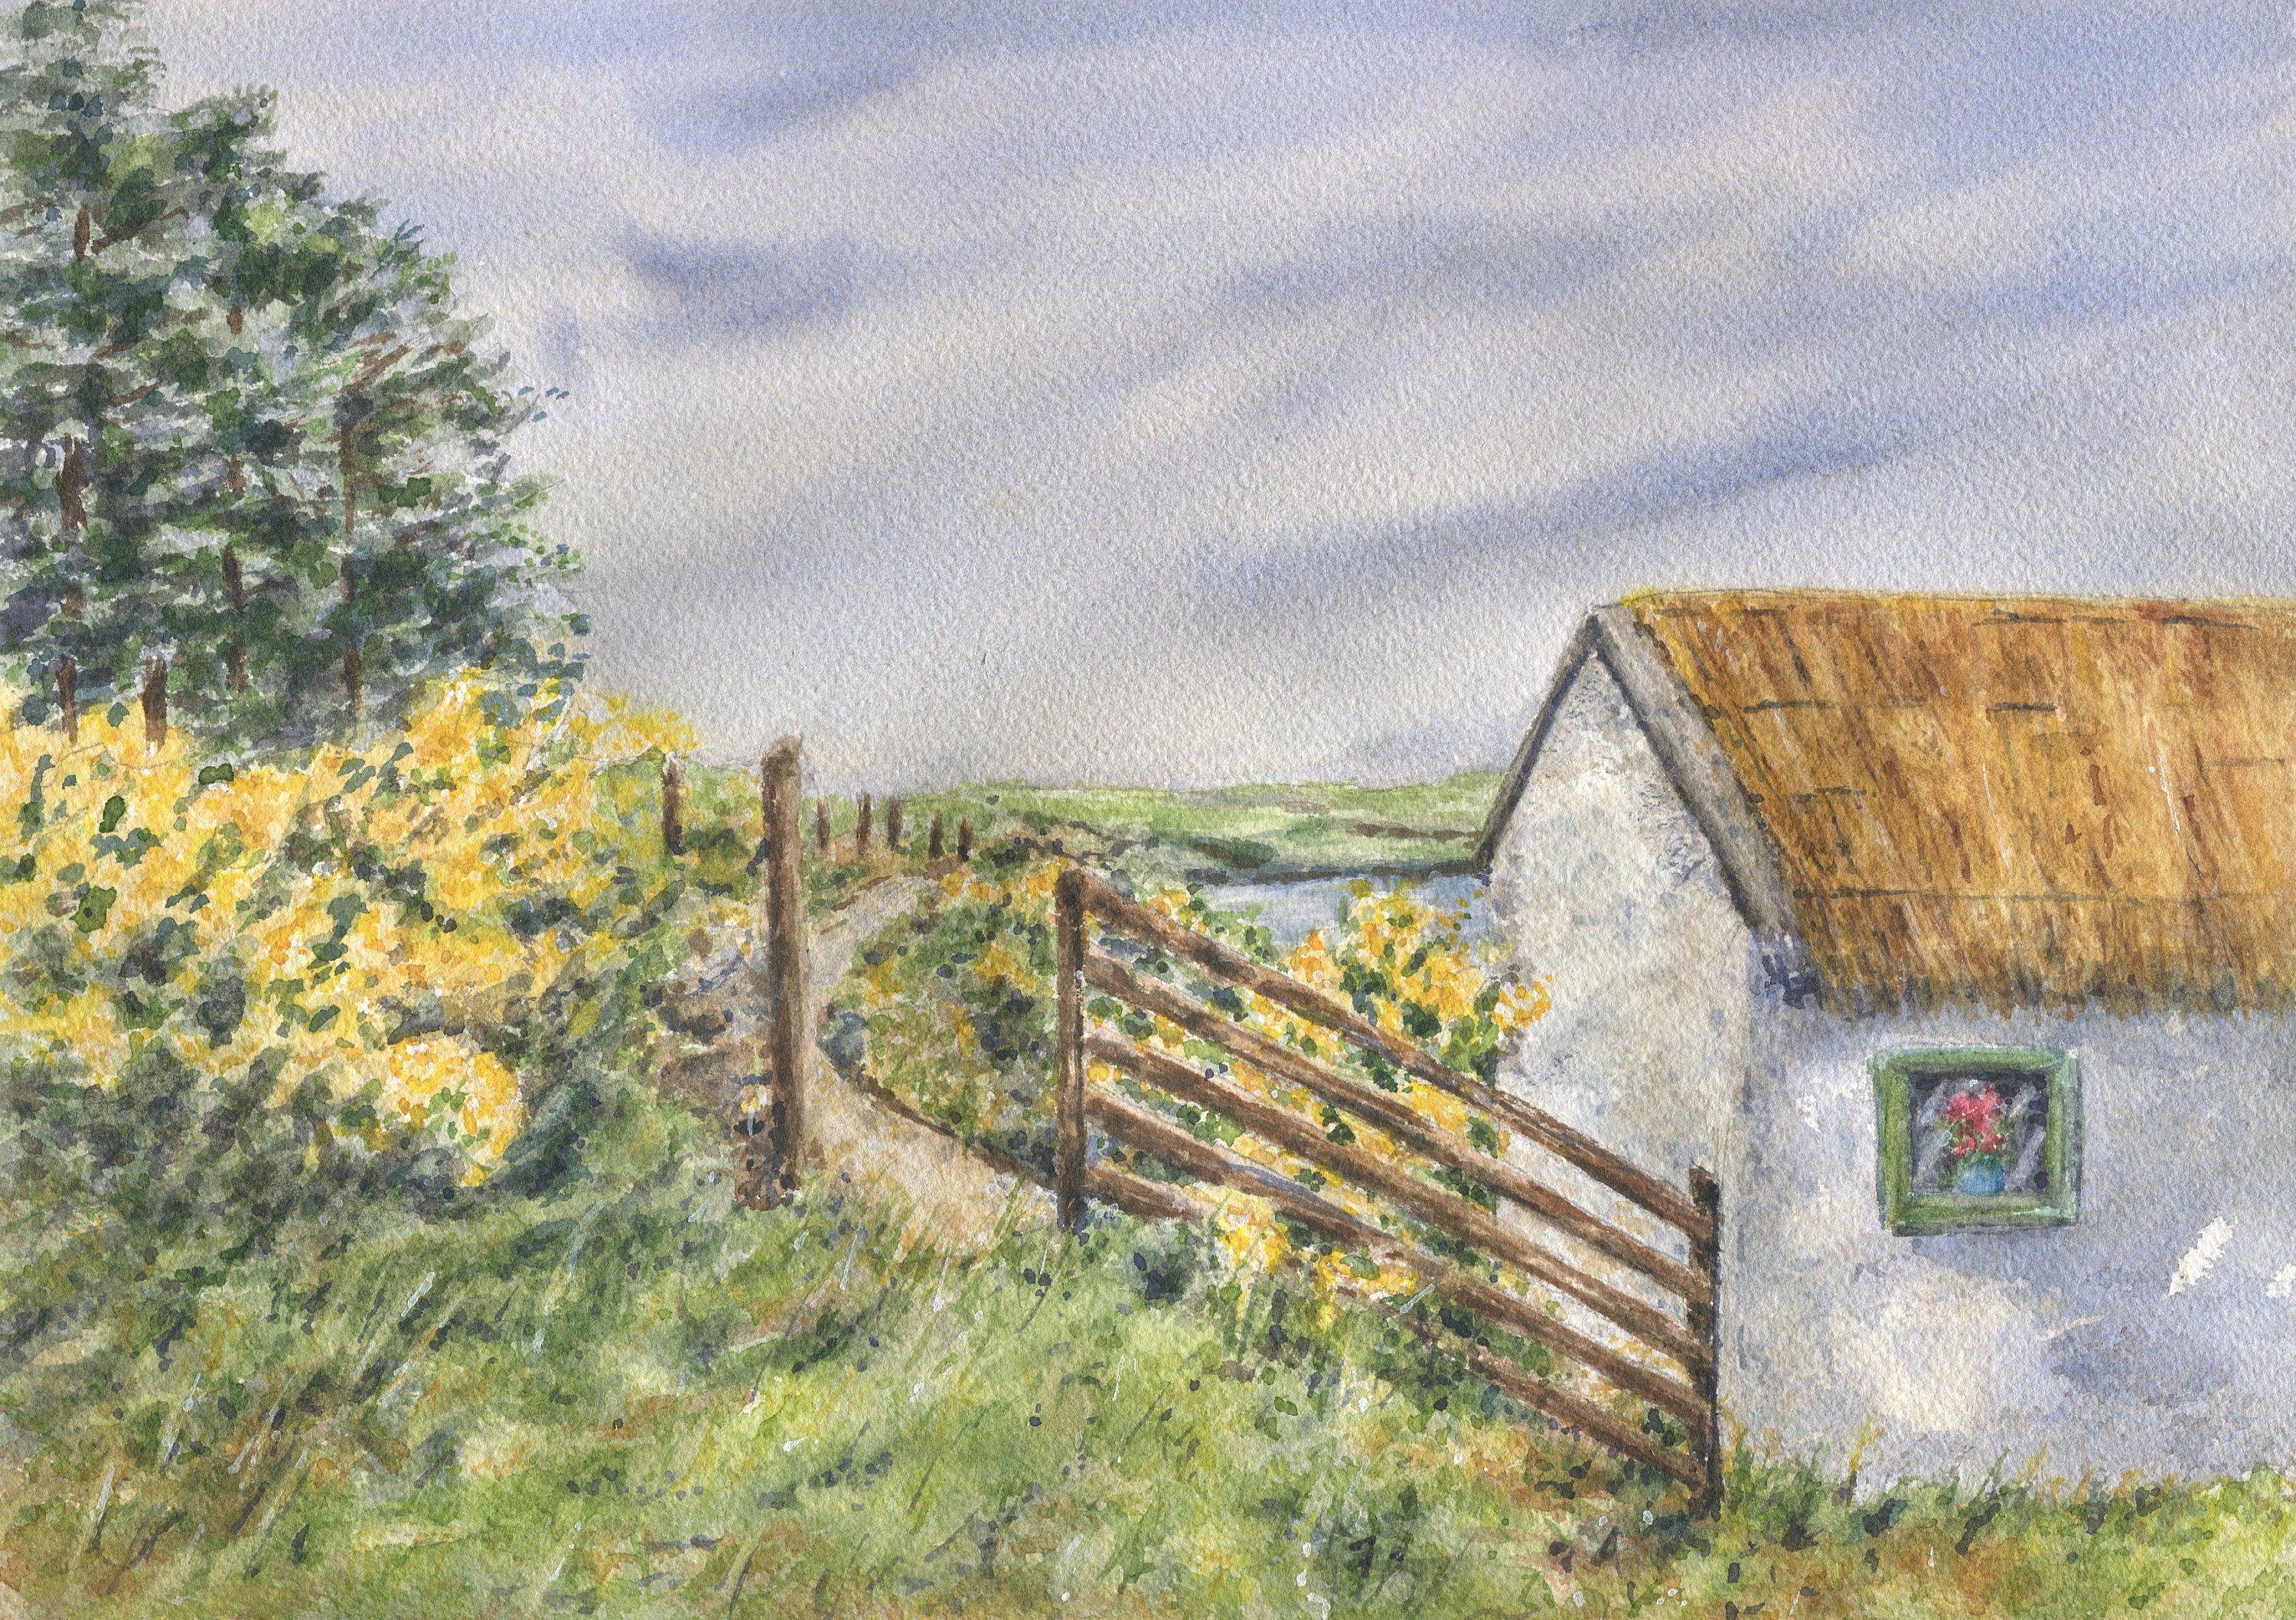 Ireland Painting Irish Original Art Village Landscape Small Painting Watercolor Cottage Artwork 8 by 6 by PaintingGiftsArt